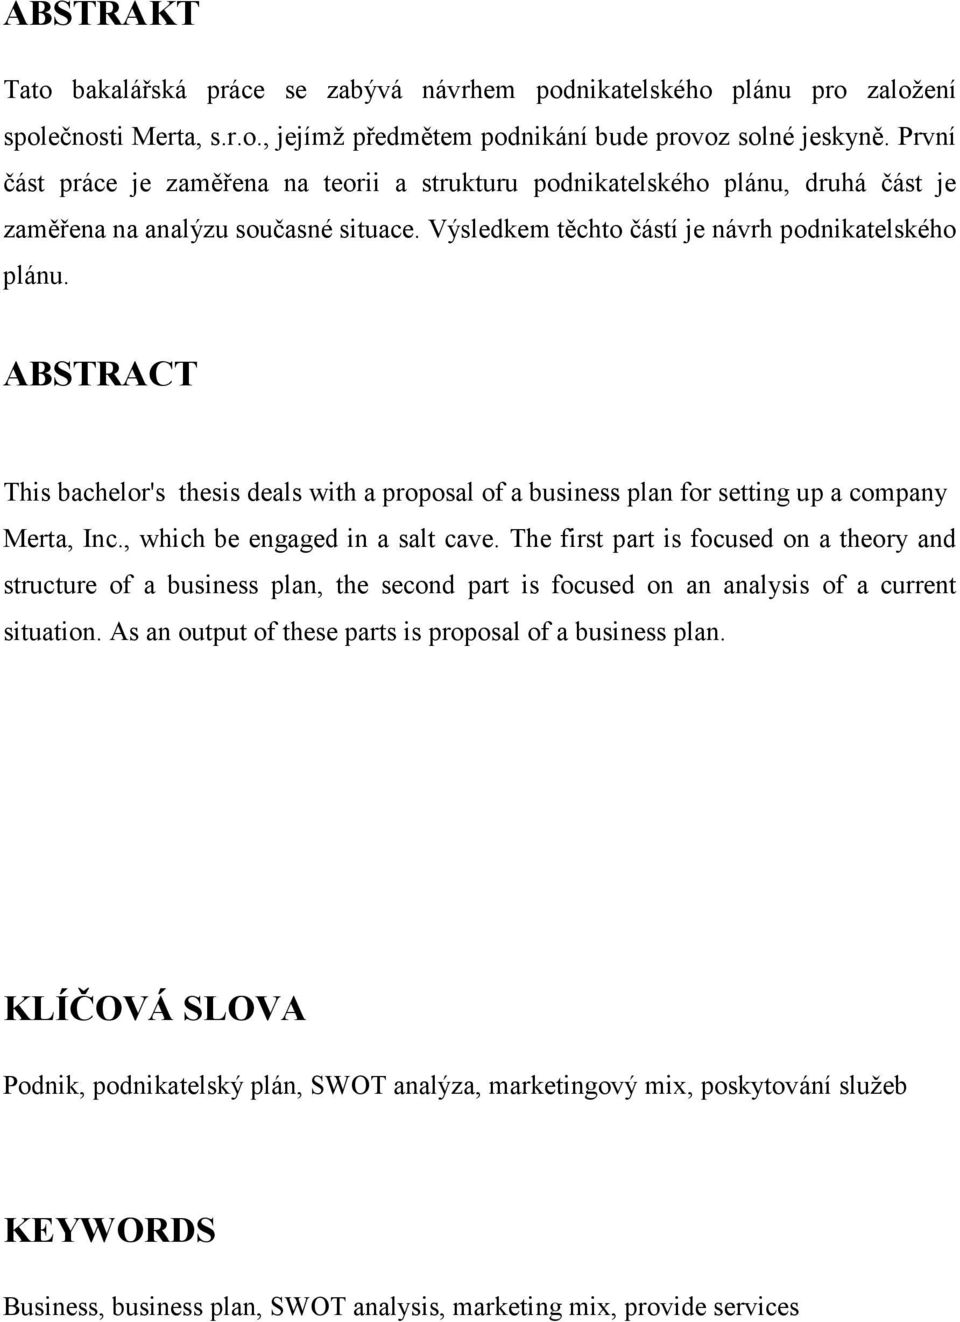 ABSTRACT This bachelor's thesis deals with a proposal of a business plan for setting up a company Merta, Inc., which be engaged in a salt cave.